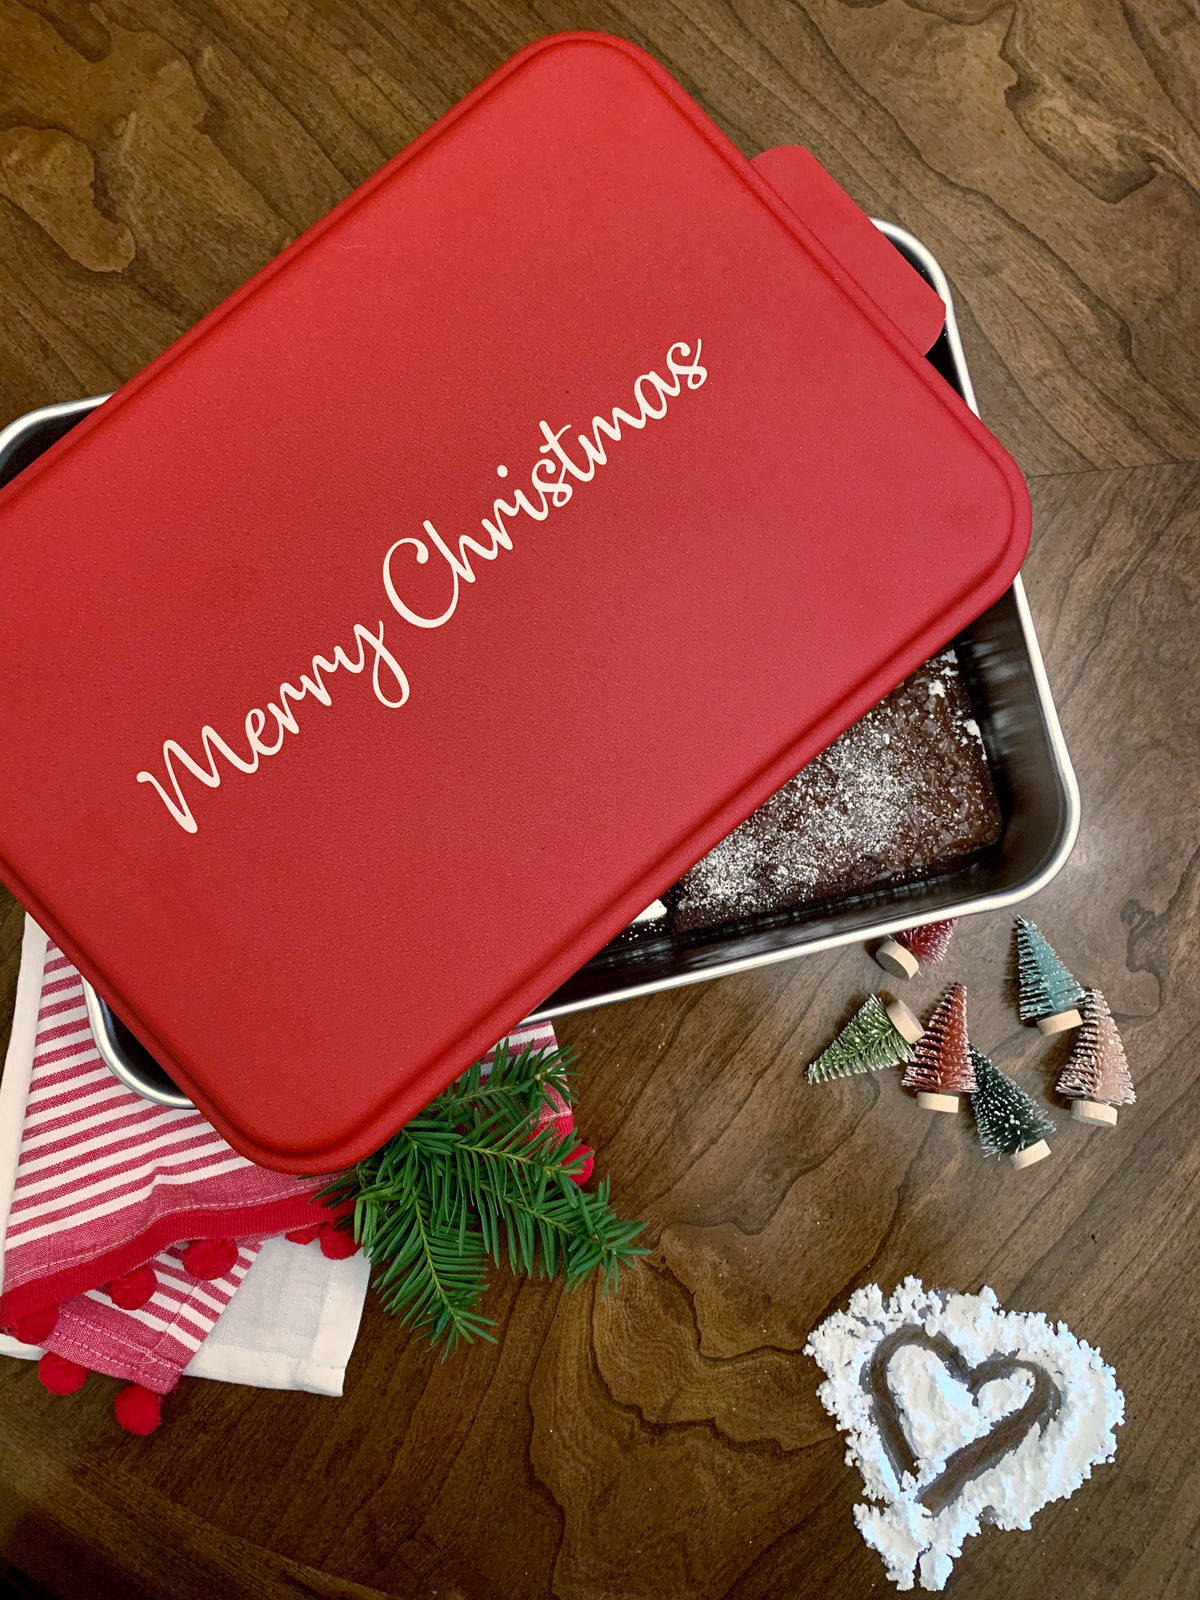 9&quot; x 13&quot; Aluminum Cake Pan with Red Lid - Merry Christmas